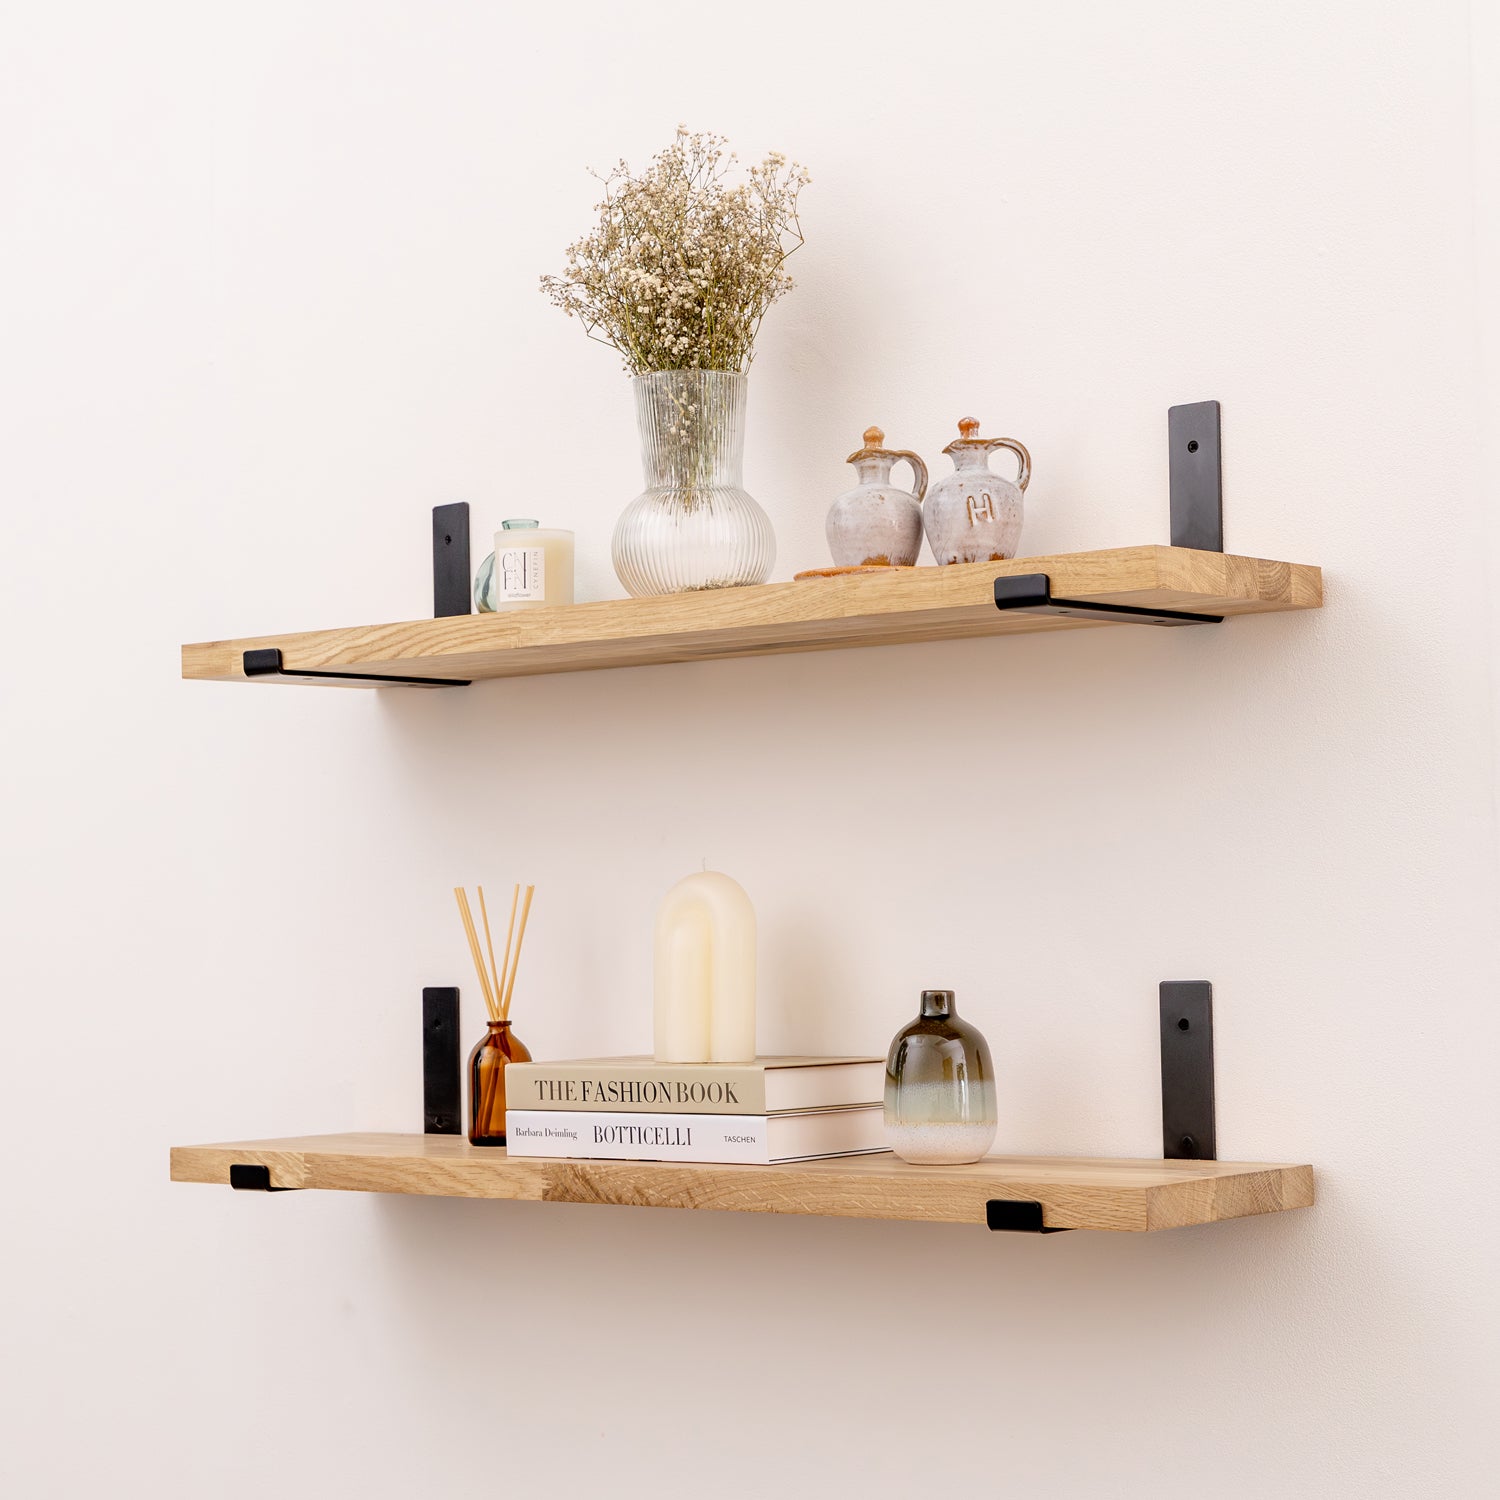 Solid Oak Wall Shelf (Sanded) - 27mm thick with Black Up-Style Scaffolding Brackets